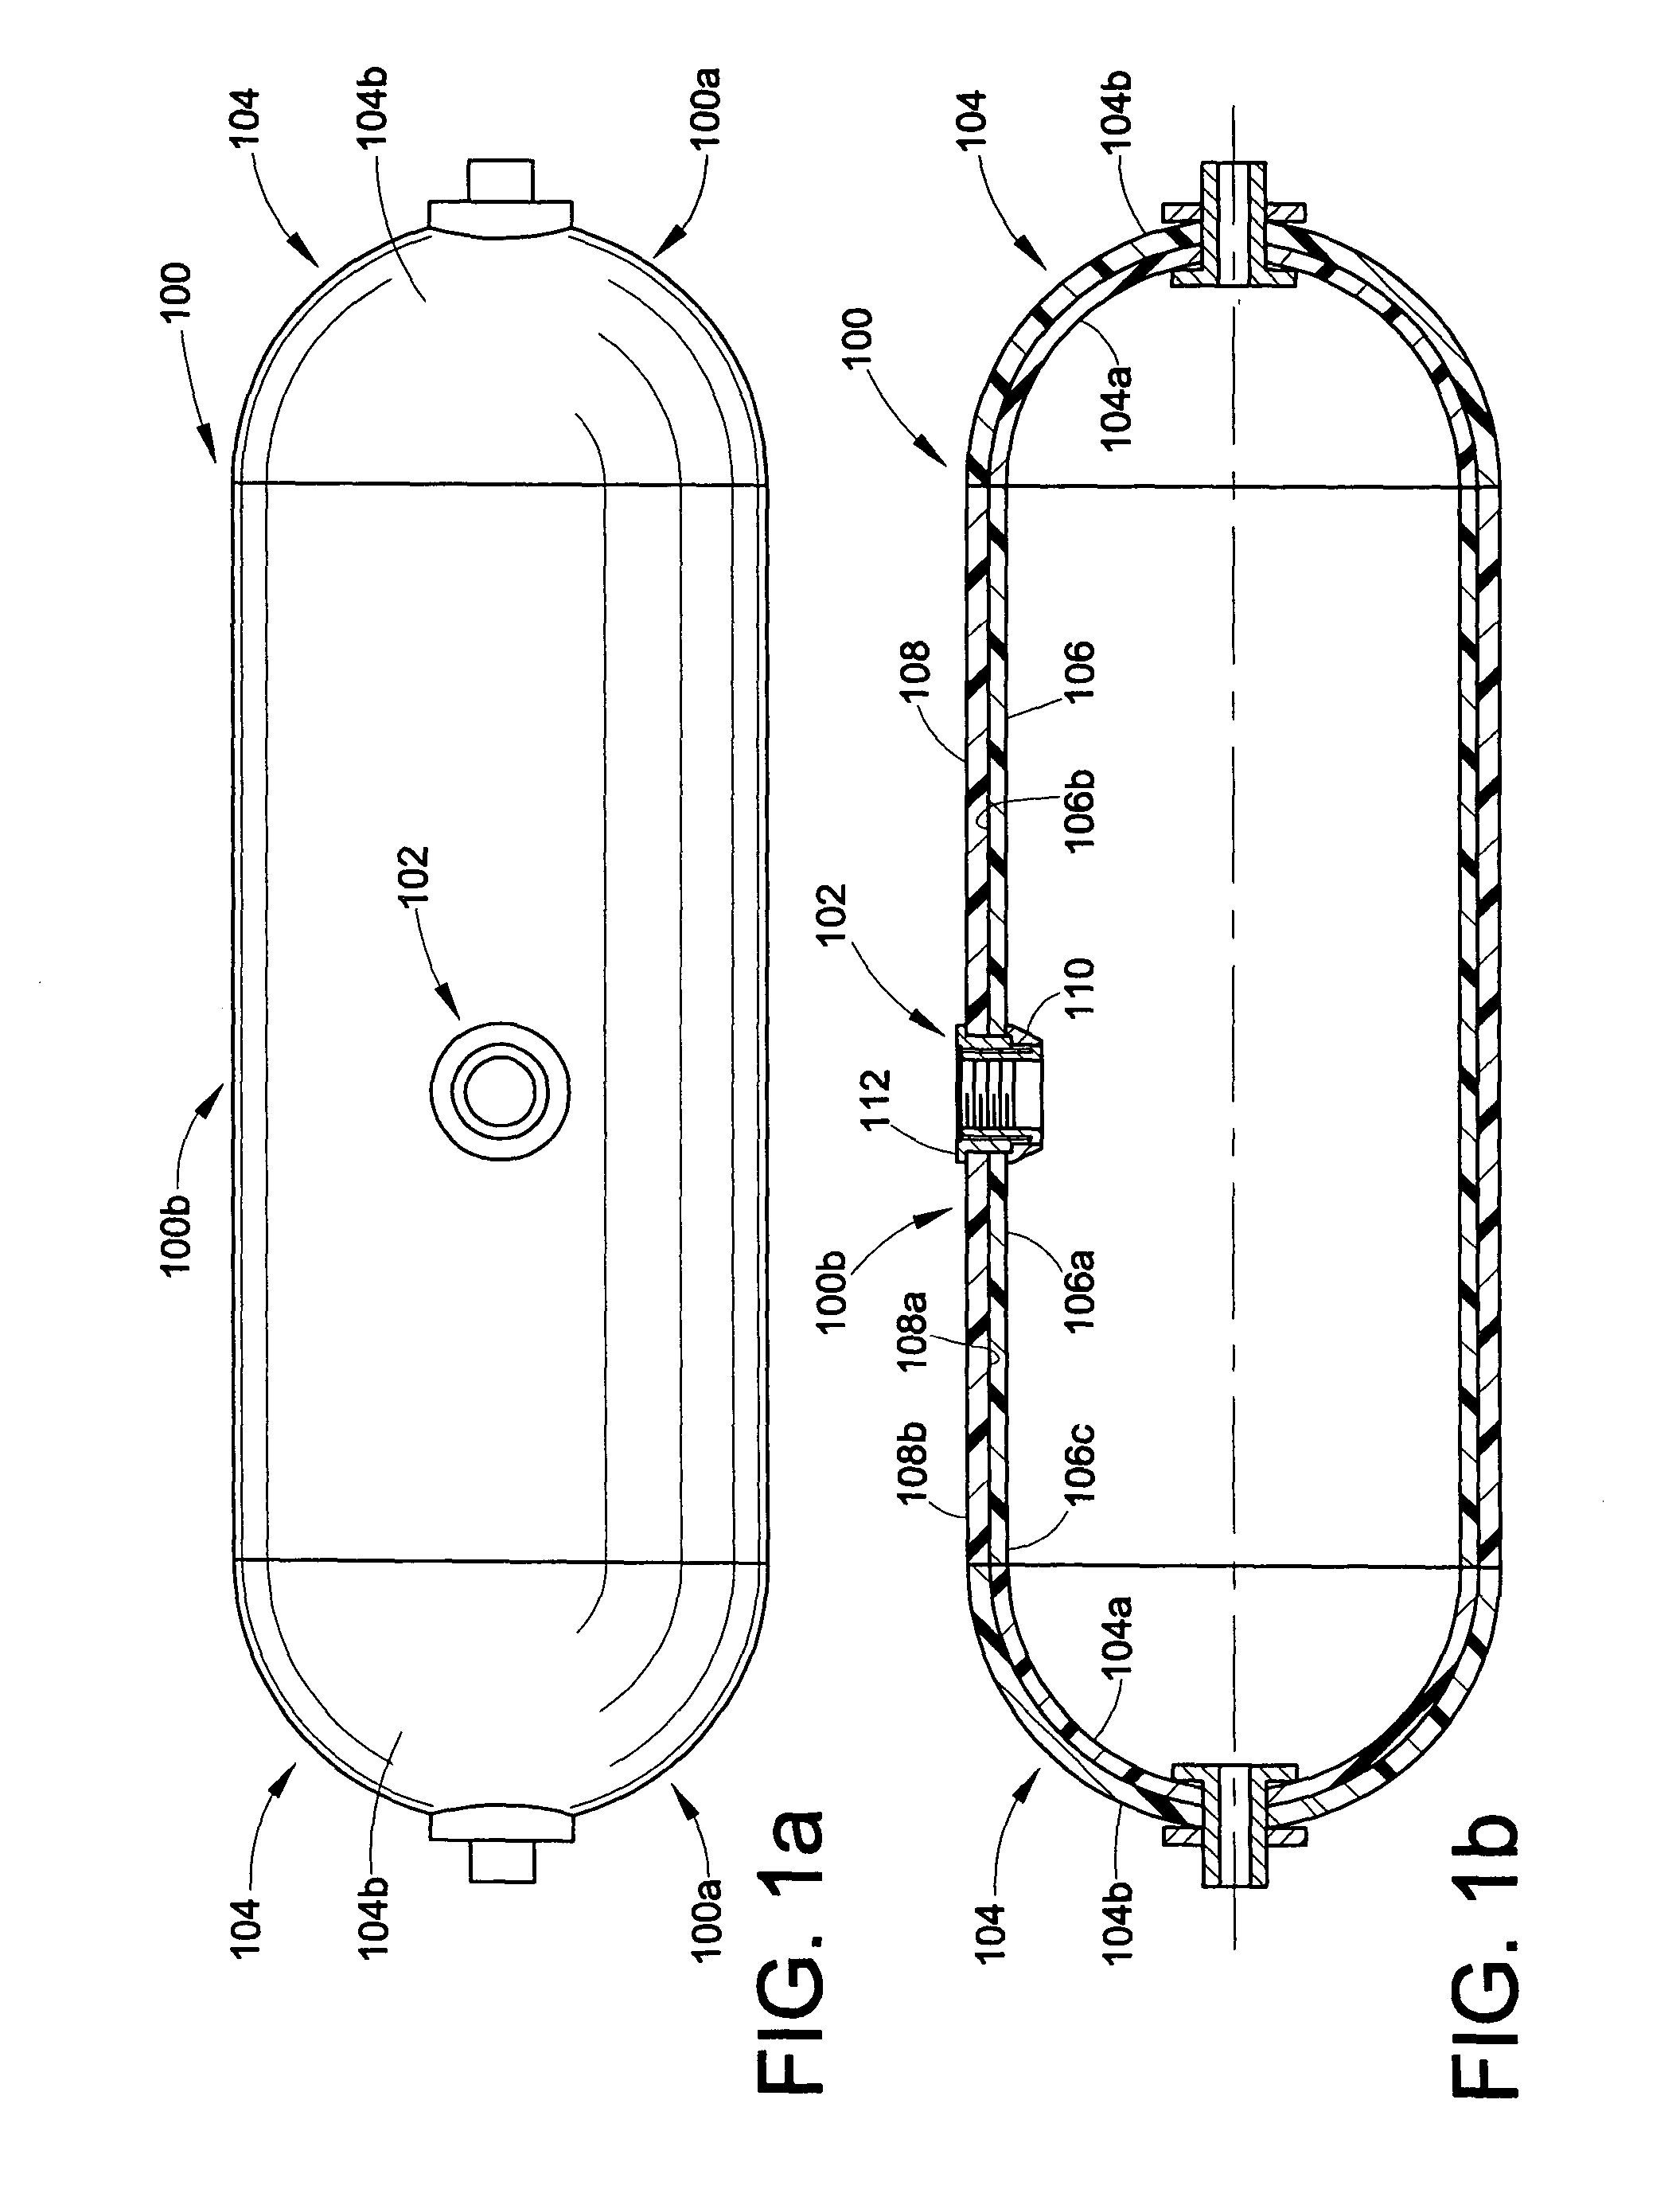 Method of forming filament-reinforced composite thermoplastic pressure vessel fitting assembly